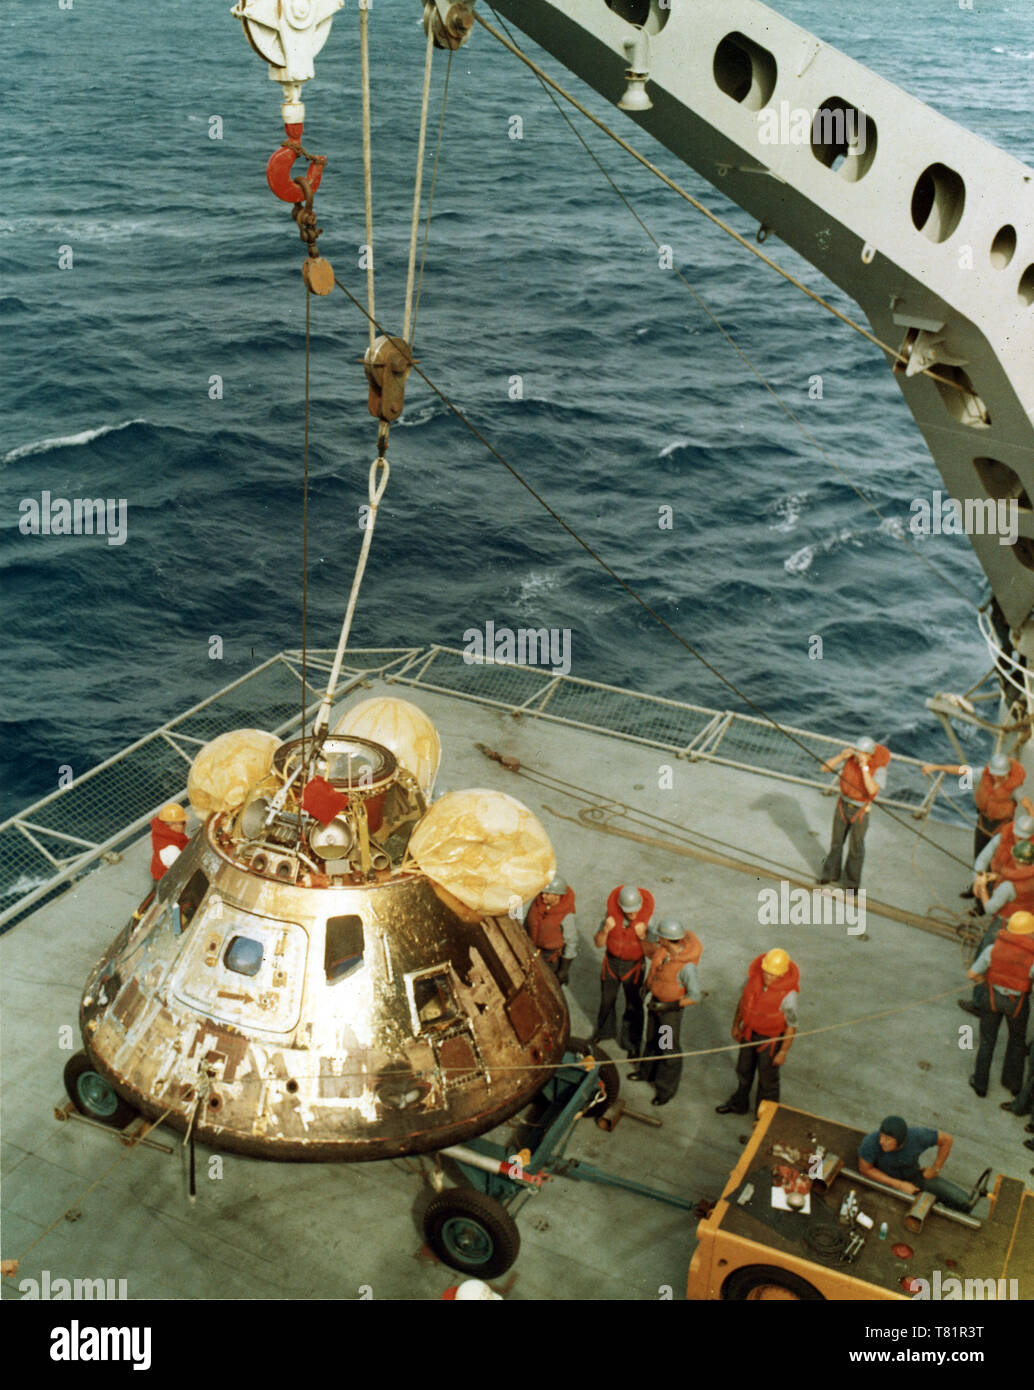 LG-101 APOLLO 11 COMMAND MODULE LOWERED TO DECK OF USS HORNET 11X14 NASA PHOTO 